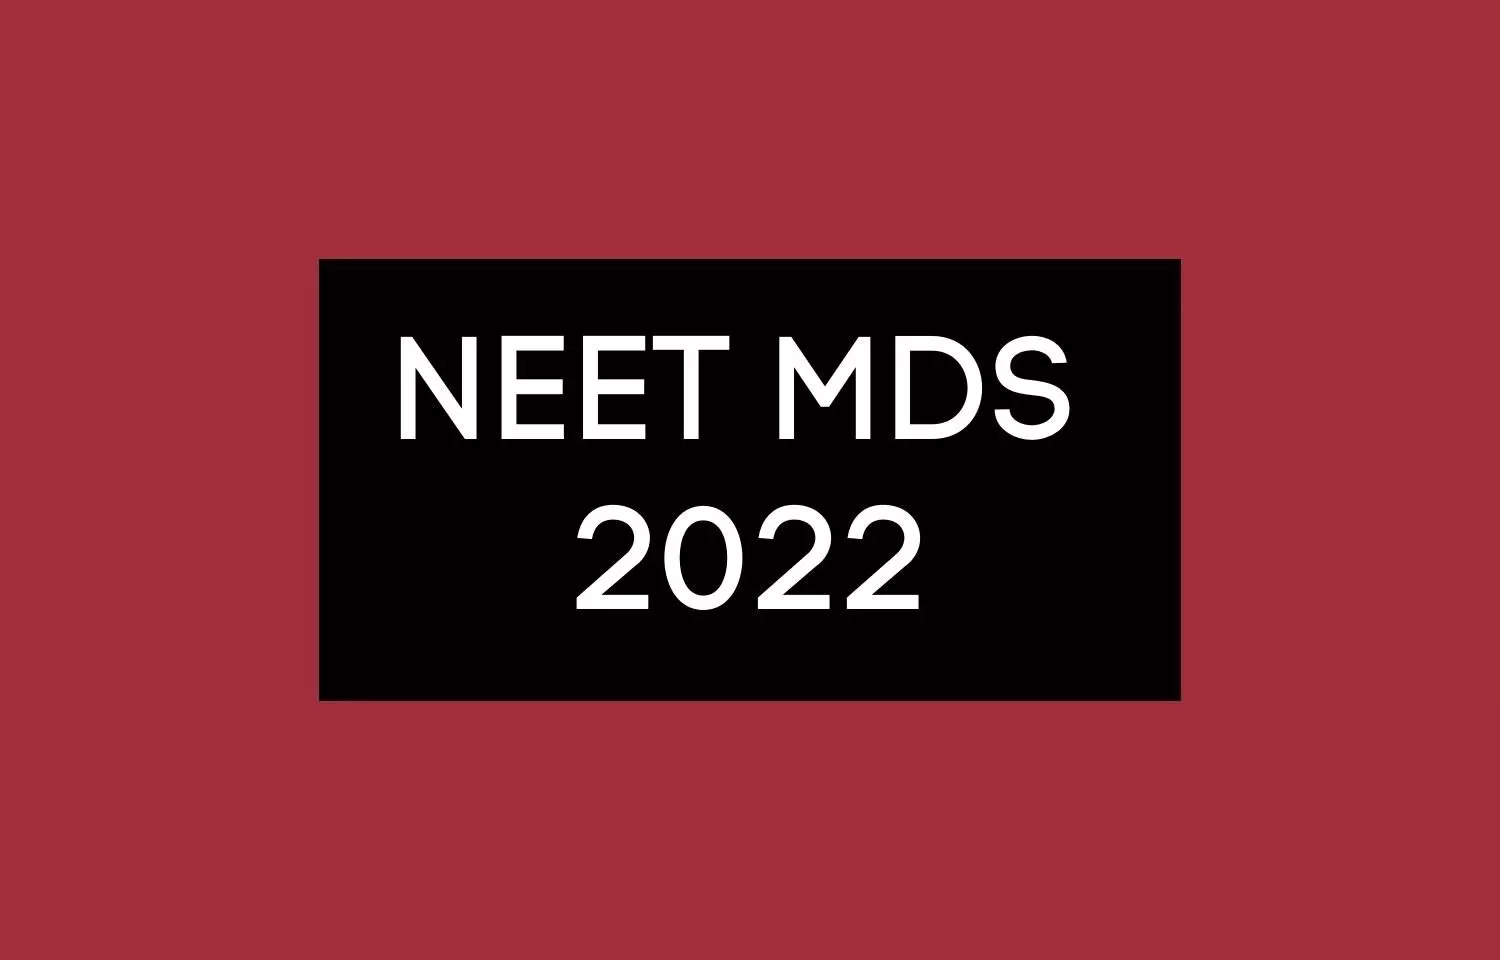 NBE extends Edit Window for NEET MDS 2022 applications